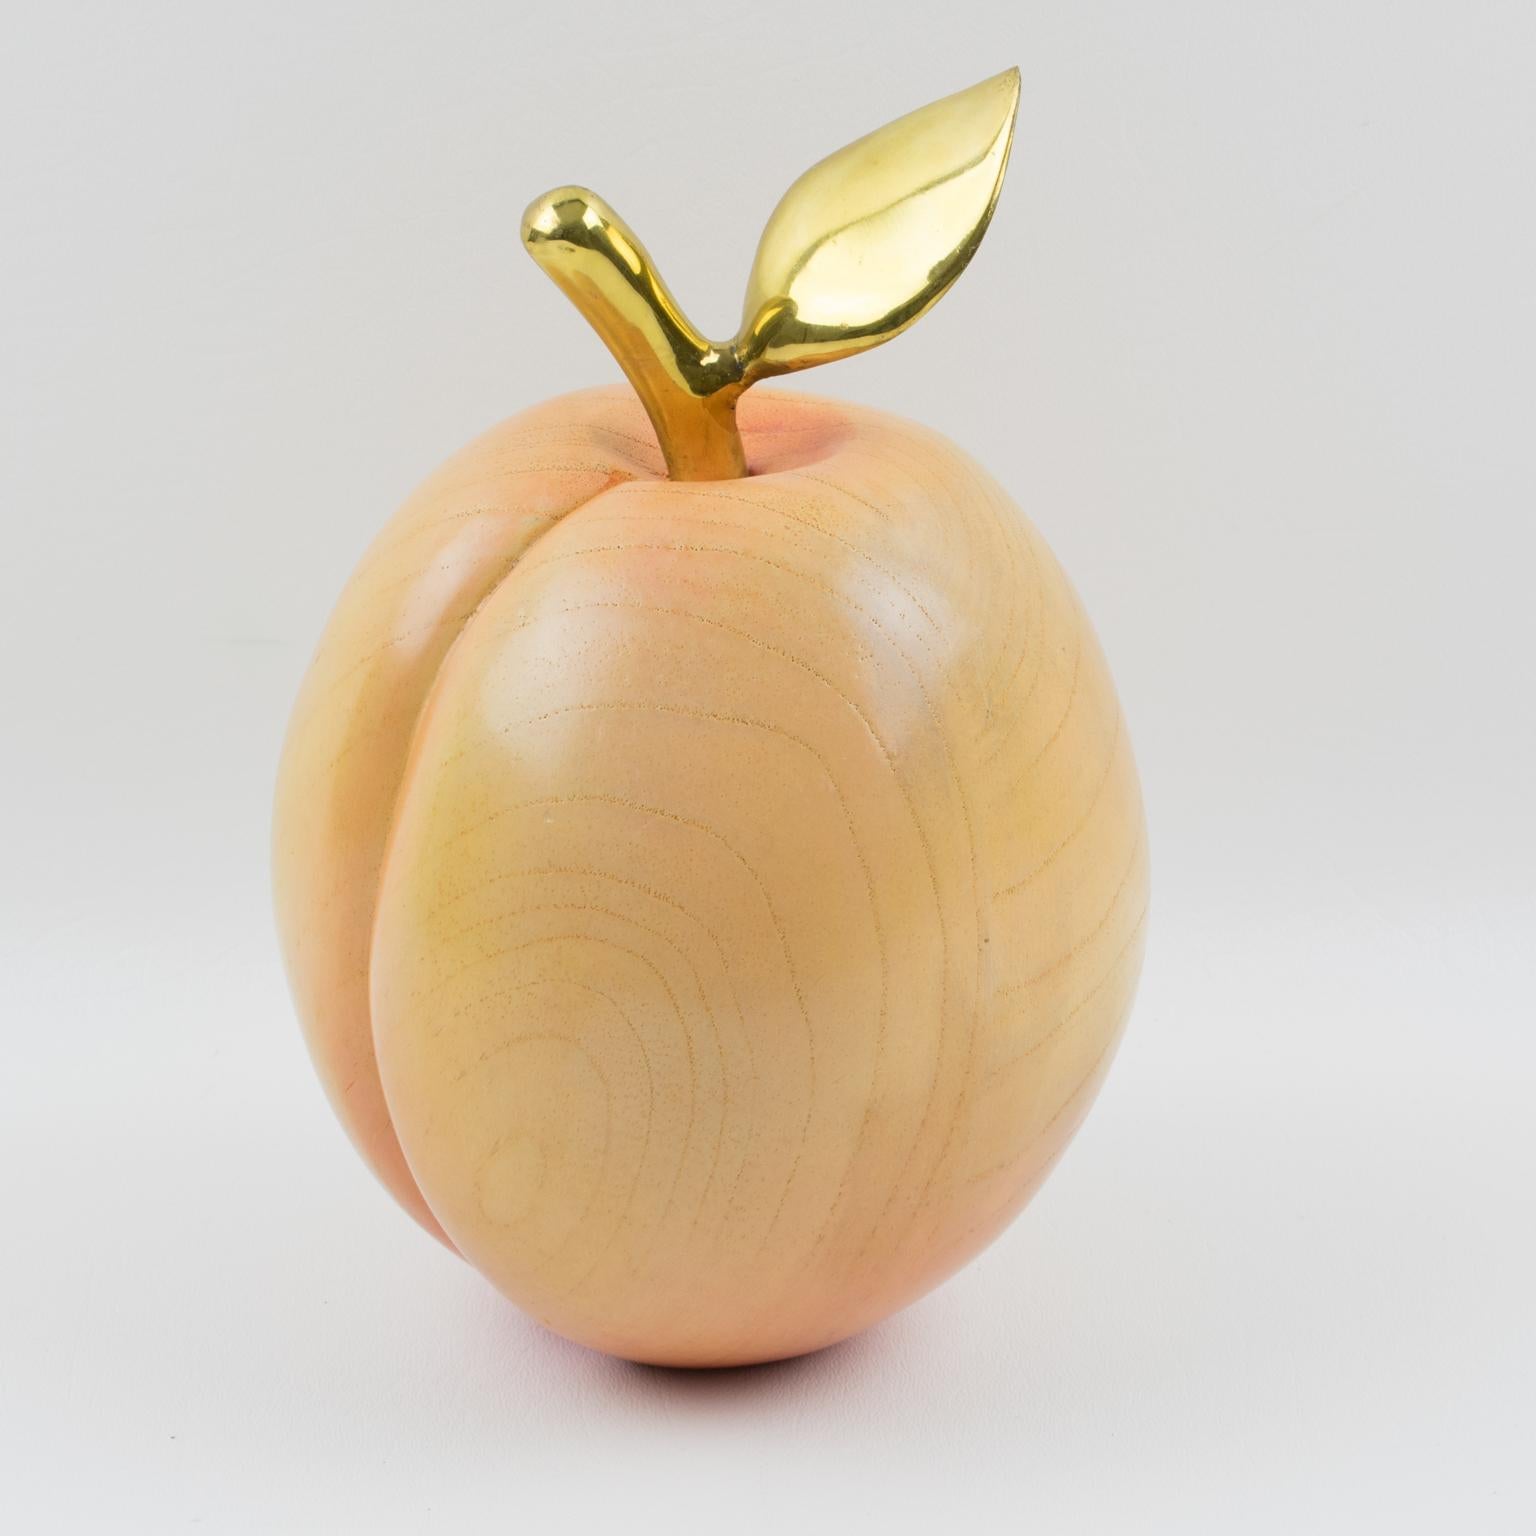 This stunning 1980s Italian decorative wood sculpture features an oversized carved peach with a brass stem and leaf. There is no visible maker's mark.
Measurements: 6 in diameter (15 cm) x 9 in high (23 cm).